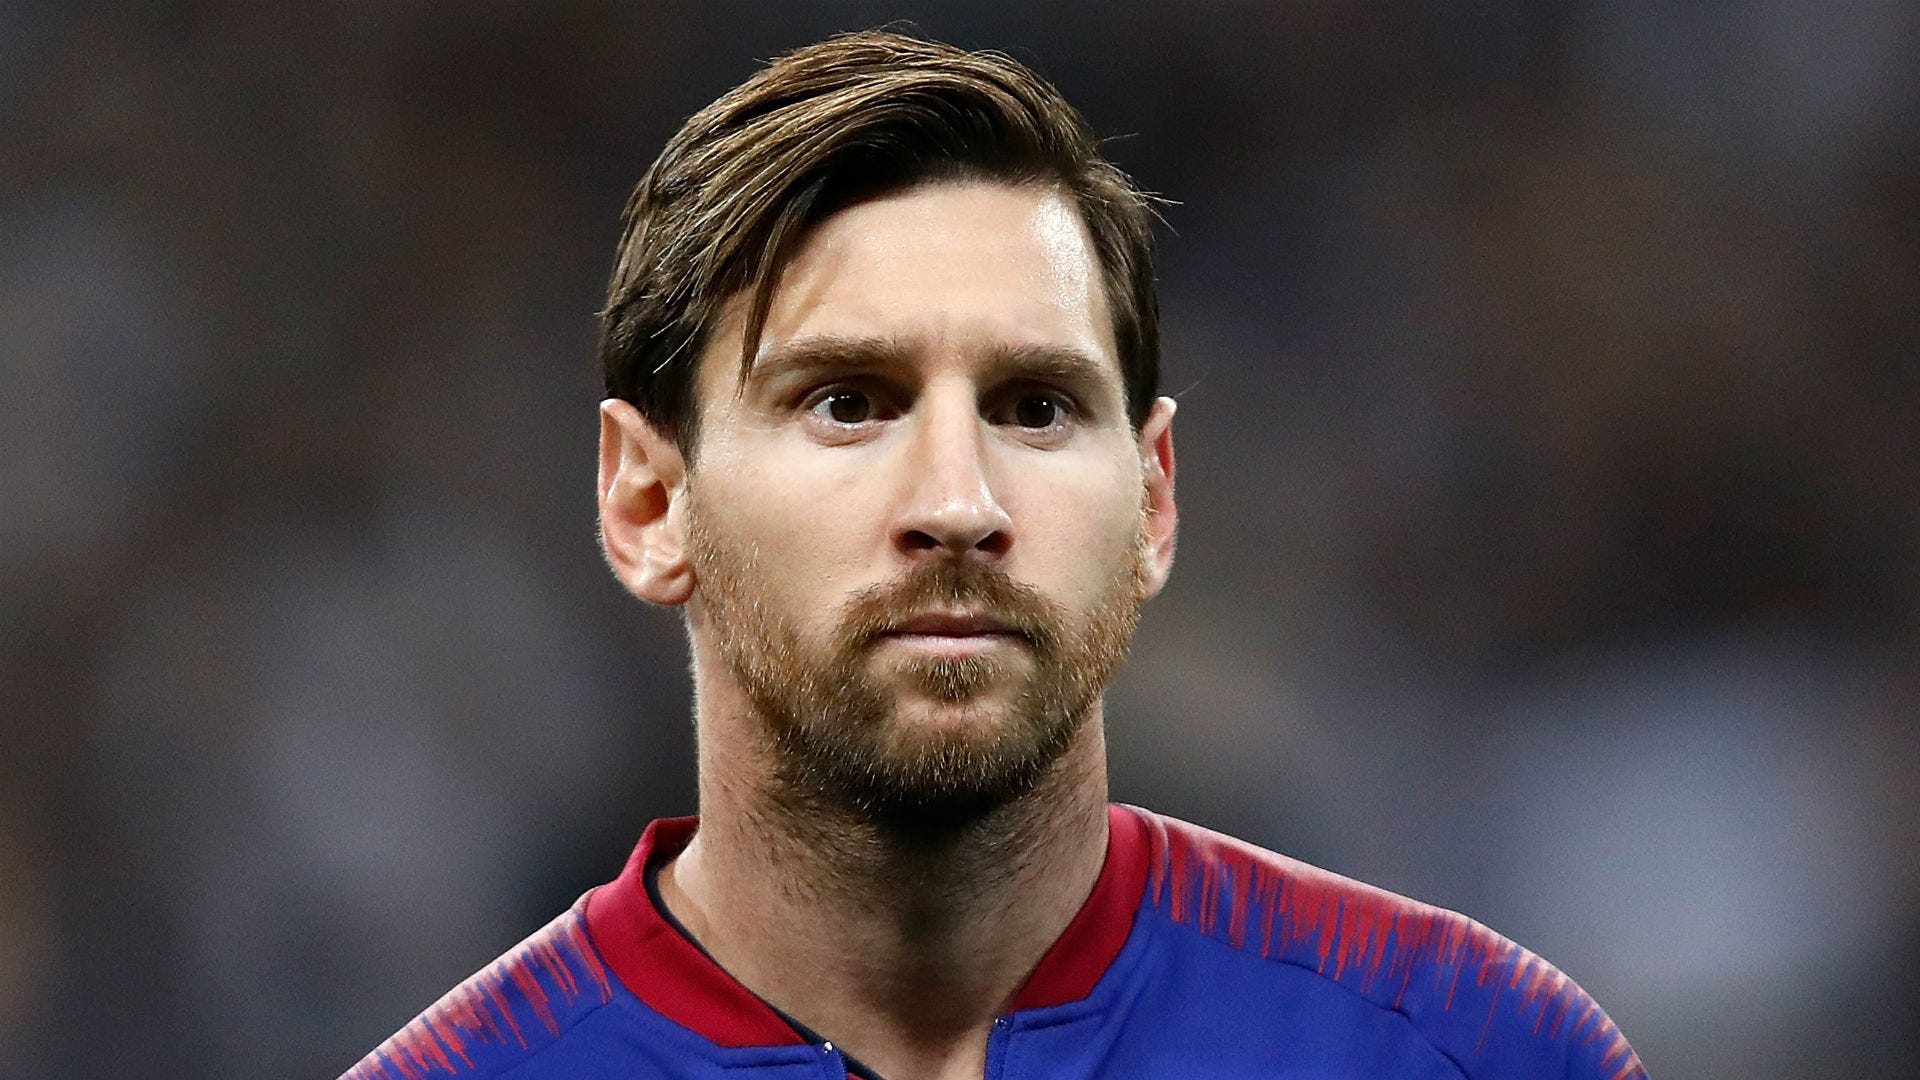 cool 40 Winning Messi Haircuts - Sporty And Stylish Looks For Guys Check  more at http://machohairst… | Messi corte de pelo, Lionel messi, Estilos de  cabello y barba